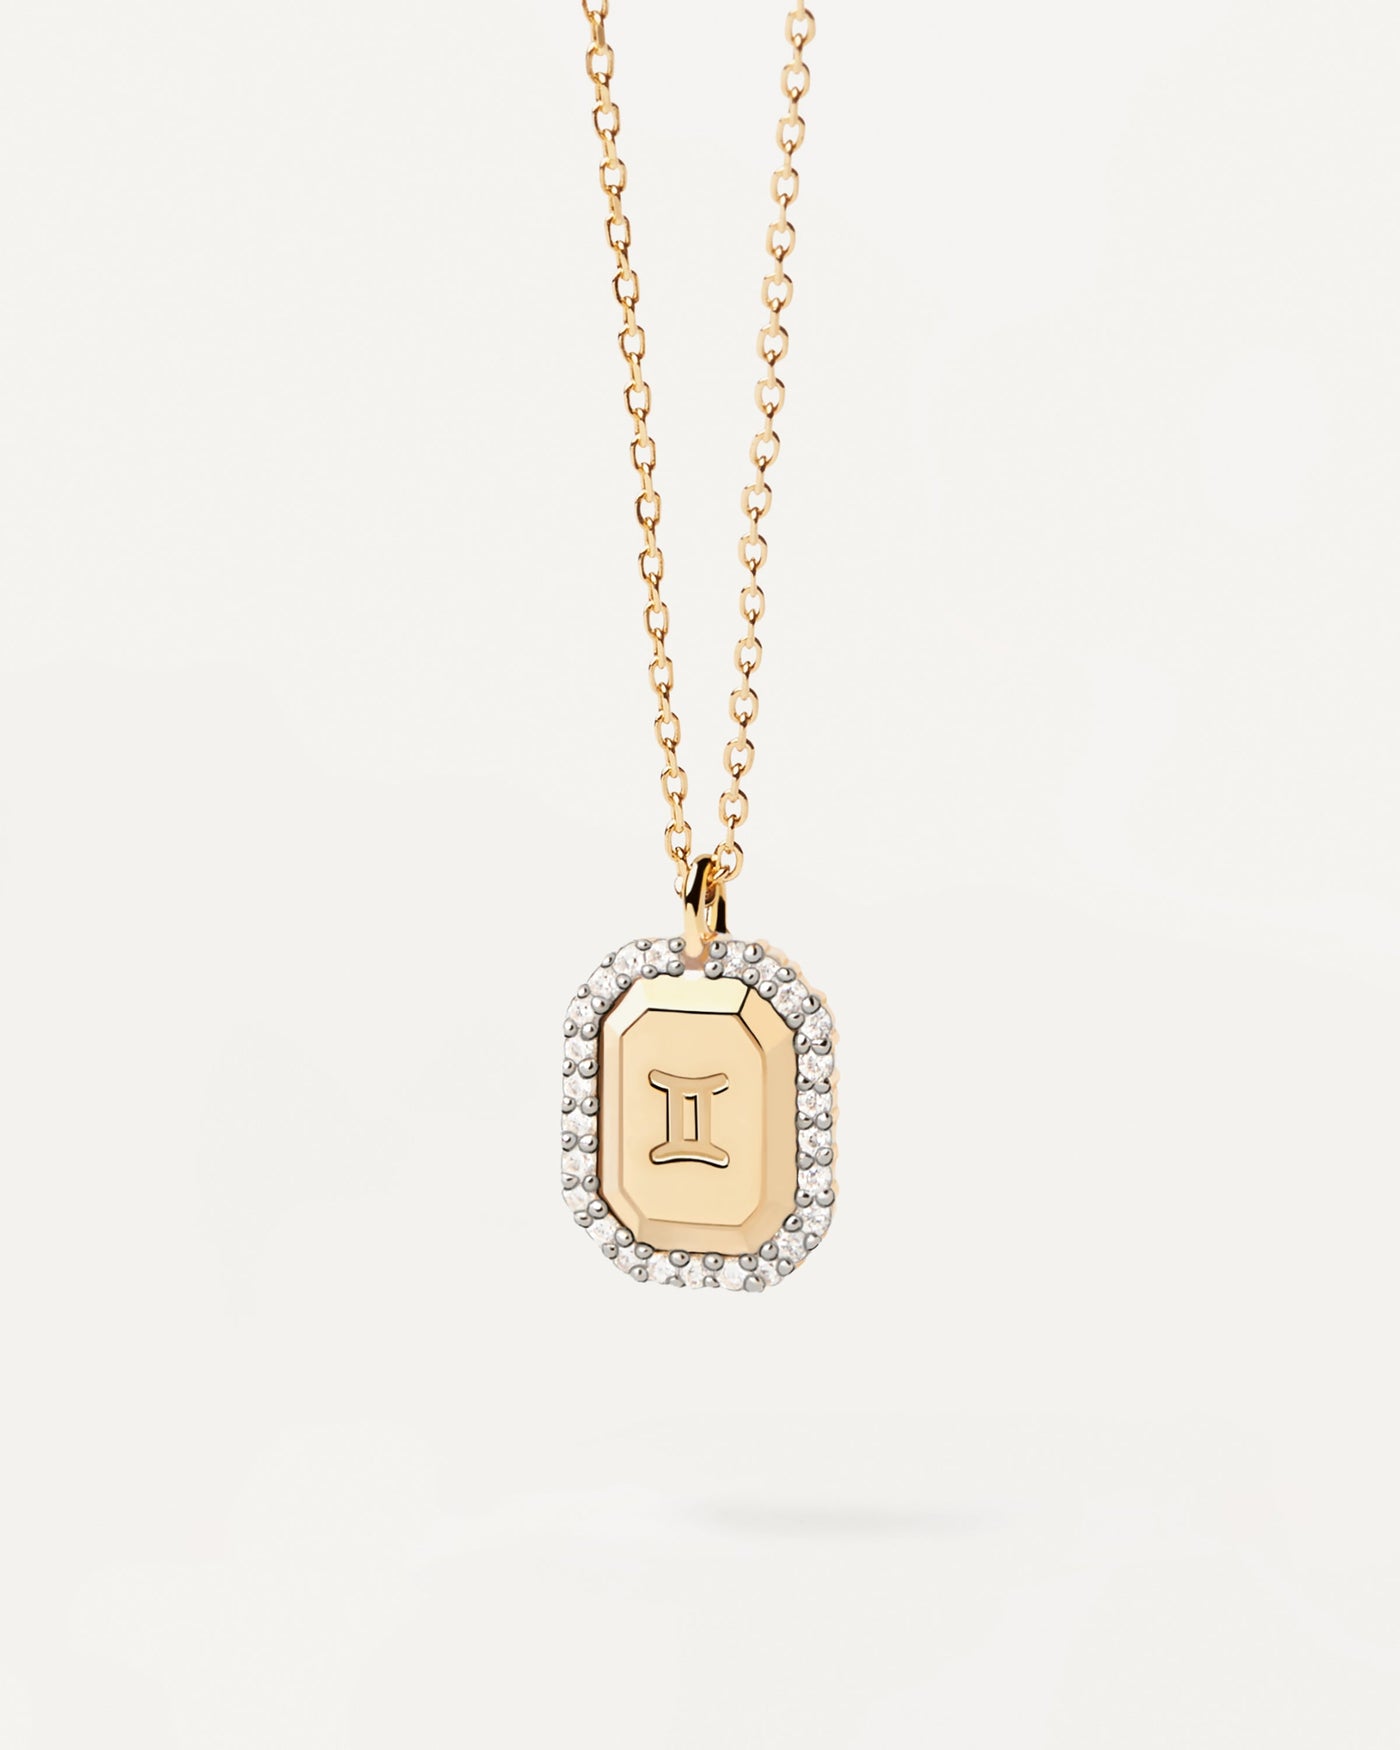 2023 Selection | Gemini astrology sign engraved in gold-plated silver pendant. Get the latest arrival from PDPAOLA. Place your order safely and get this Best Seller. Free Shipping.